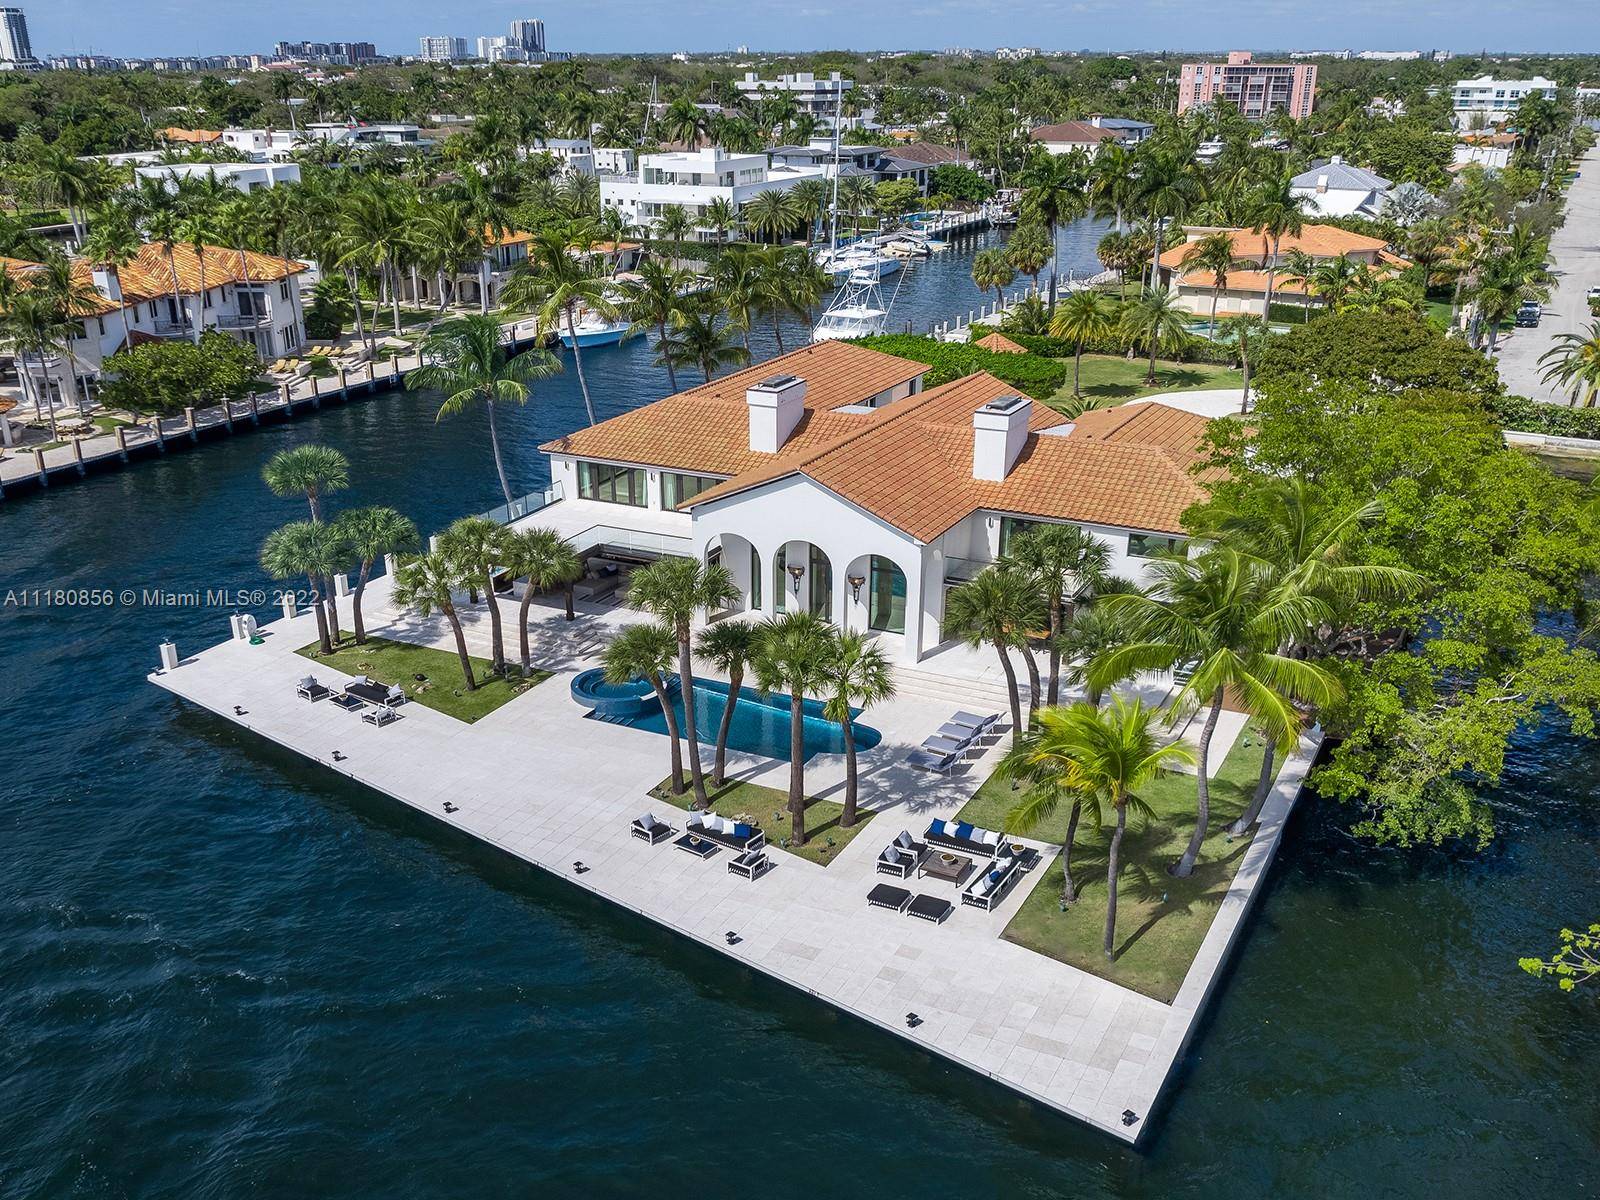 This Las Olas Isles estate has the rare distinction of occupying its own private peninsula, with spectacular views and approx.